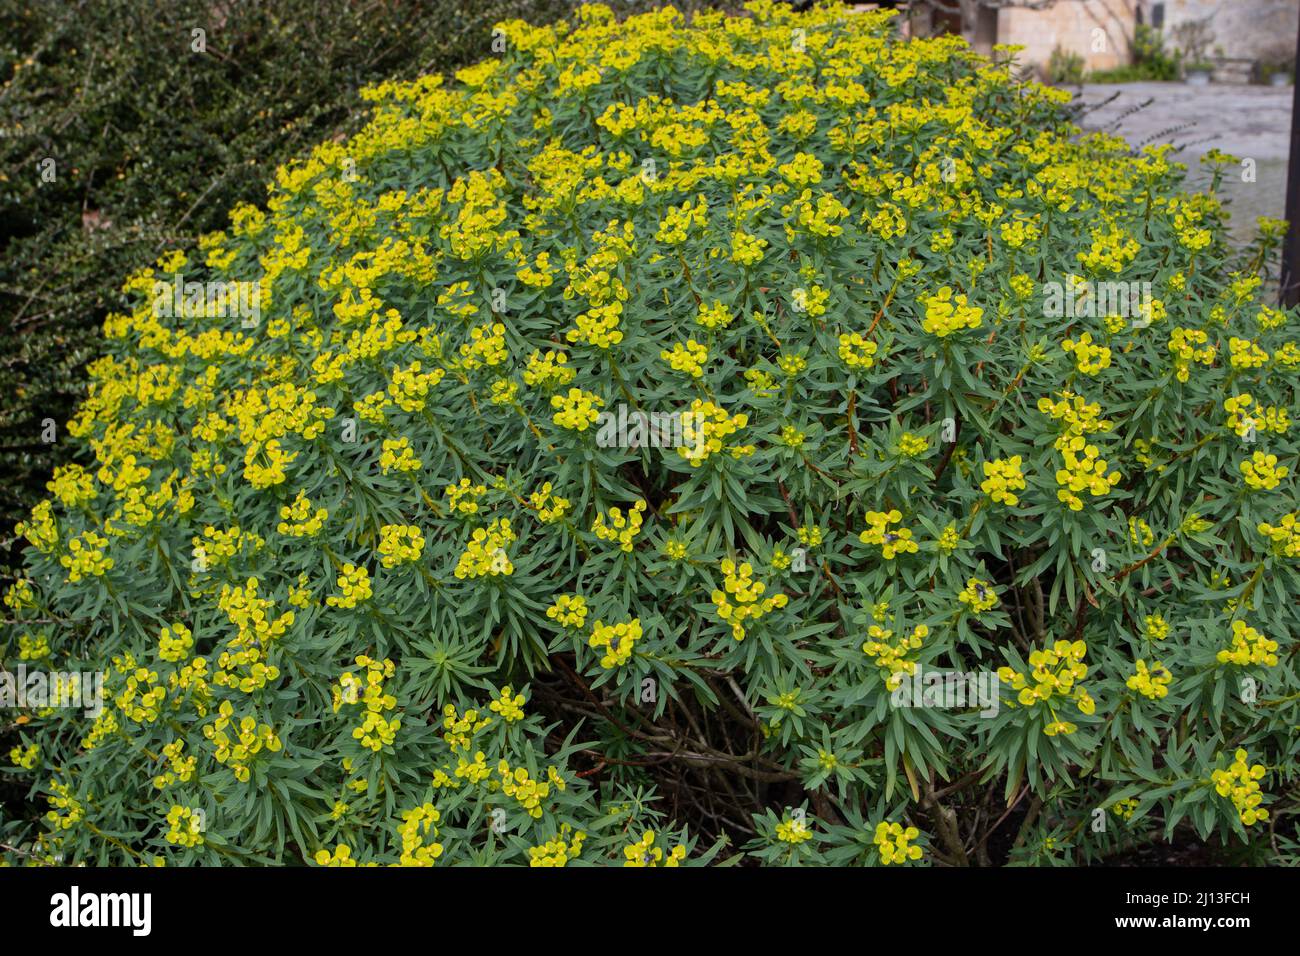 Euphorbia dendroides or tree spurge flowering succulent plant covered with yellow flowers. Stock Photo